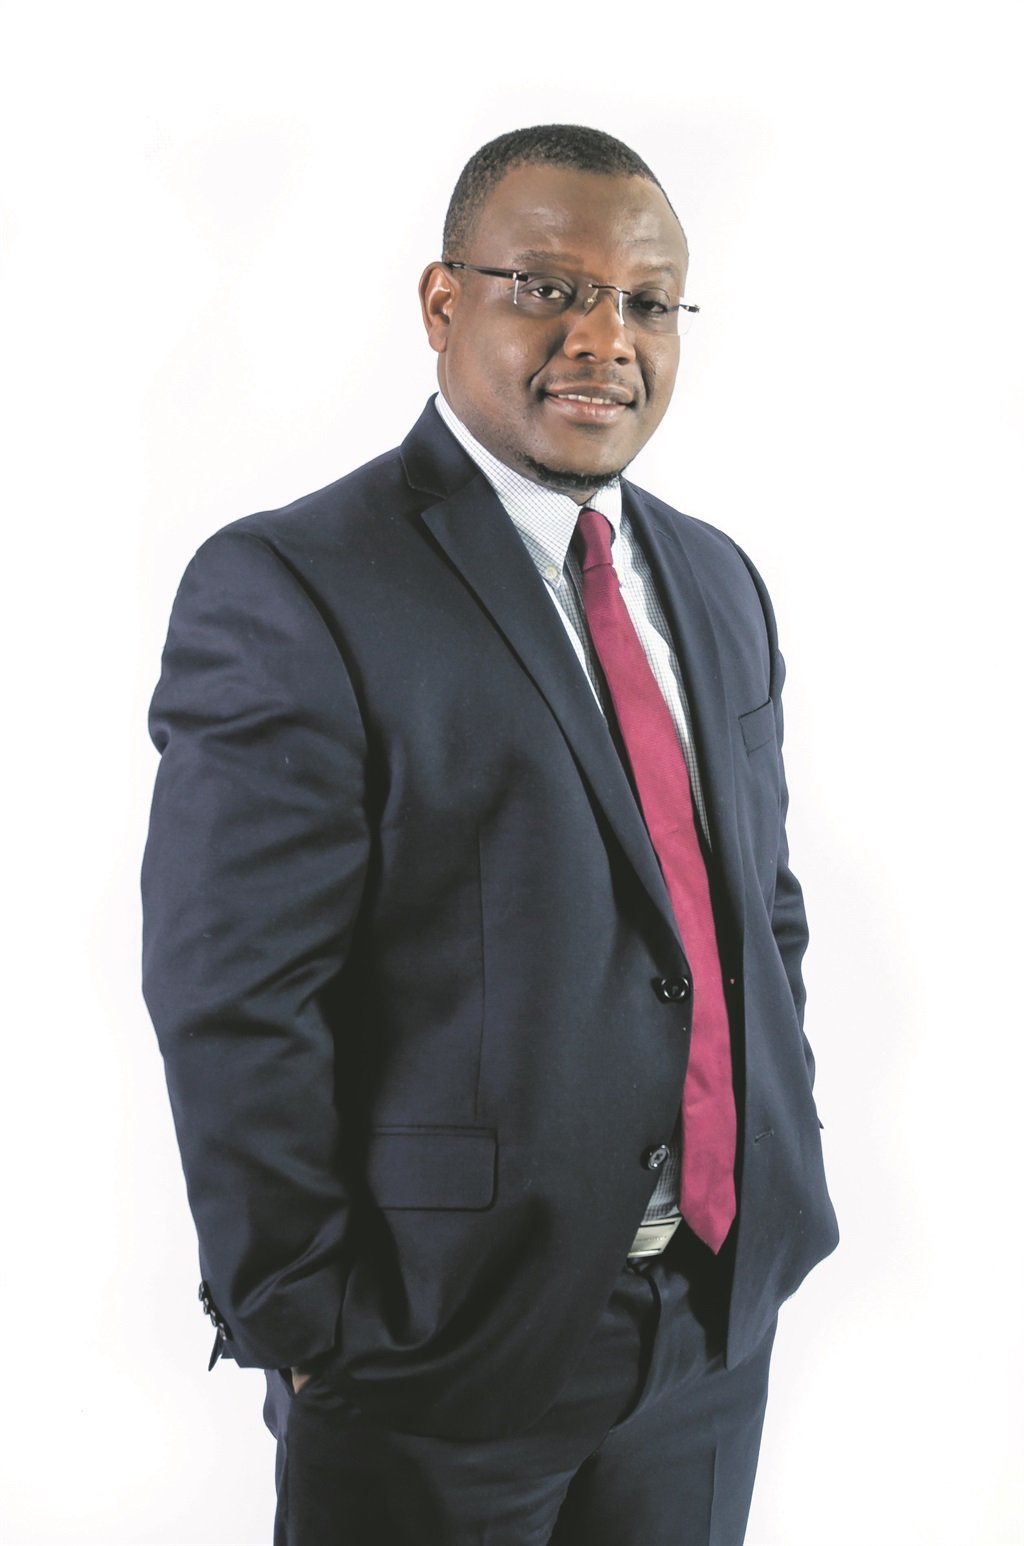 Healthcare investment company RH Bophelo's CEO Quinton Zunga believes there is room for growth in South Africa's private healthcare industry (Photo: RH Managers)